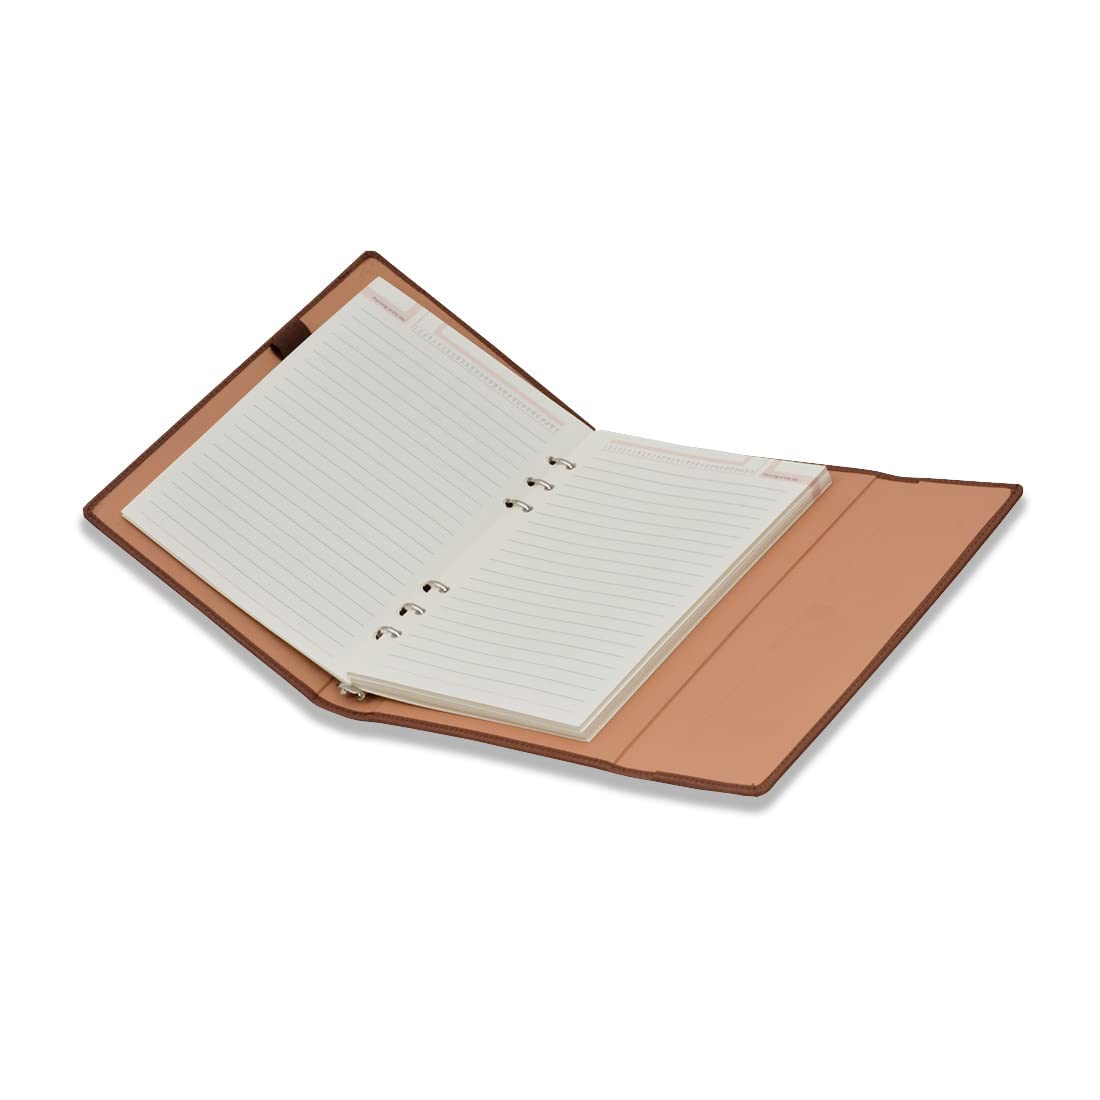 Paperlla Brown Daily Planner | To Do List Diary | Organizer with Pen